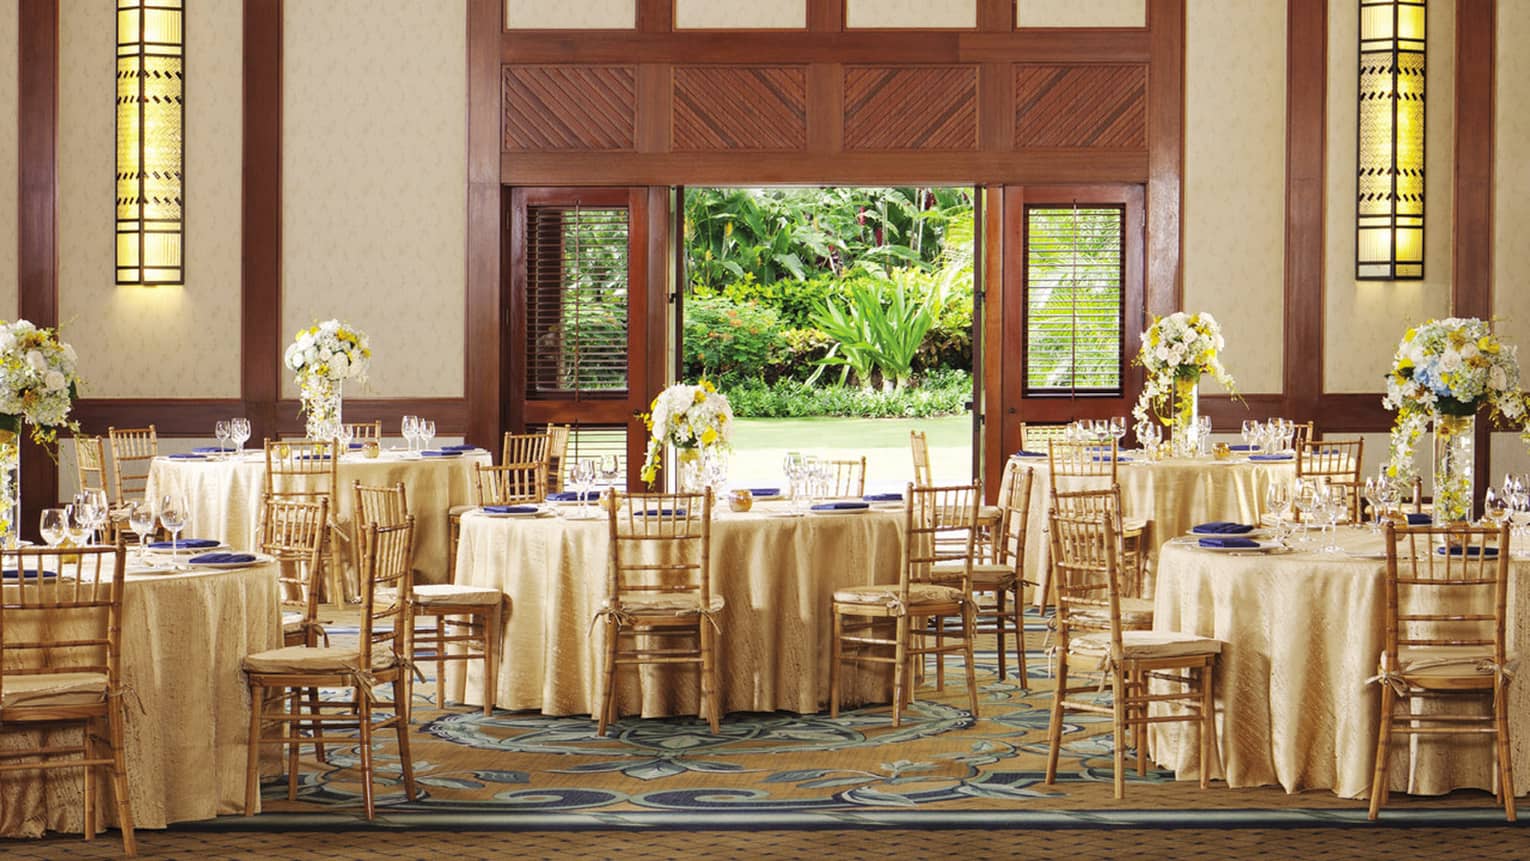 Hualalai ballroom with round banquet dining tables under high ceilings, open door to garden